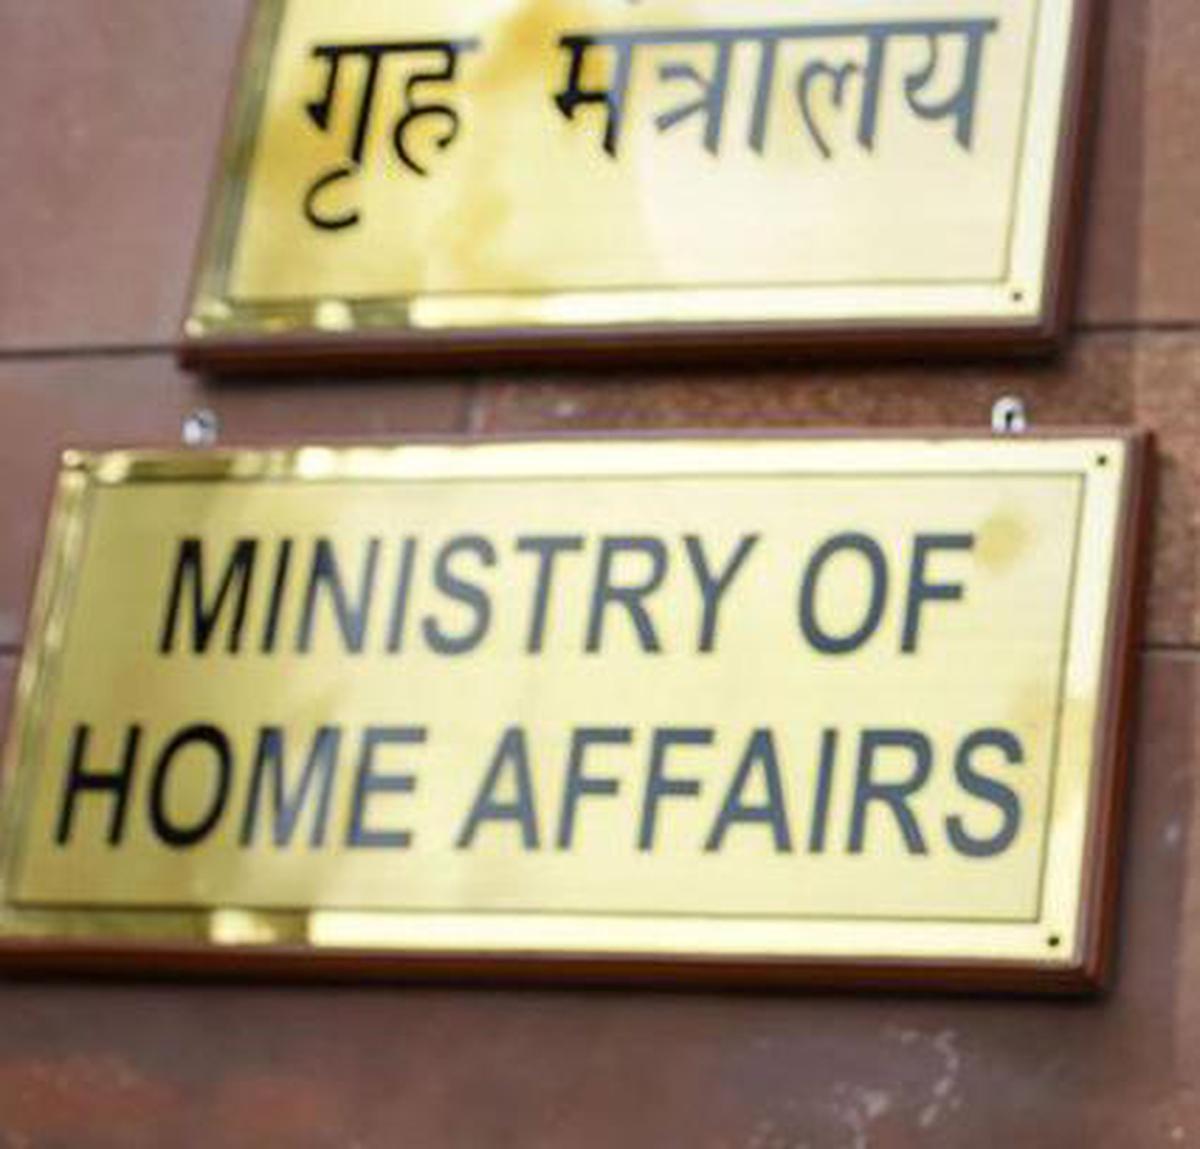 CAA is a benign piece of legislation, Union Home Ministry tells Supreme Court